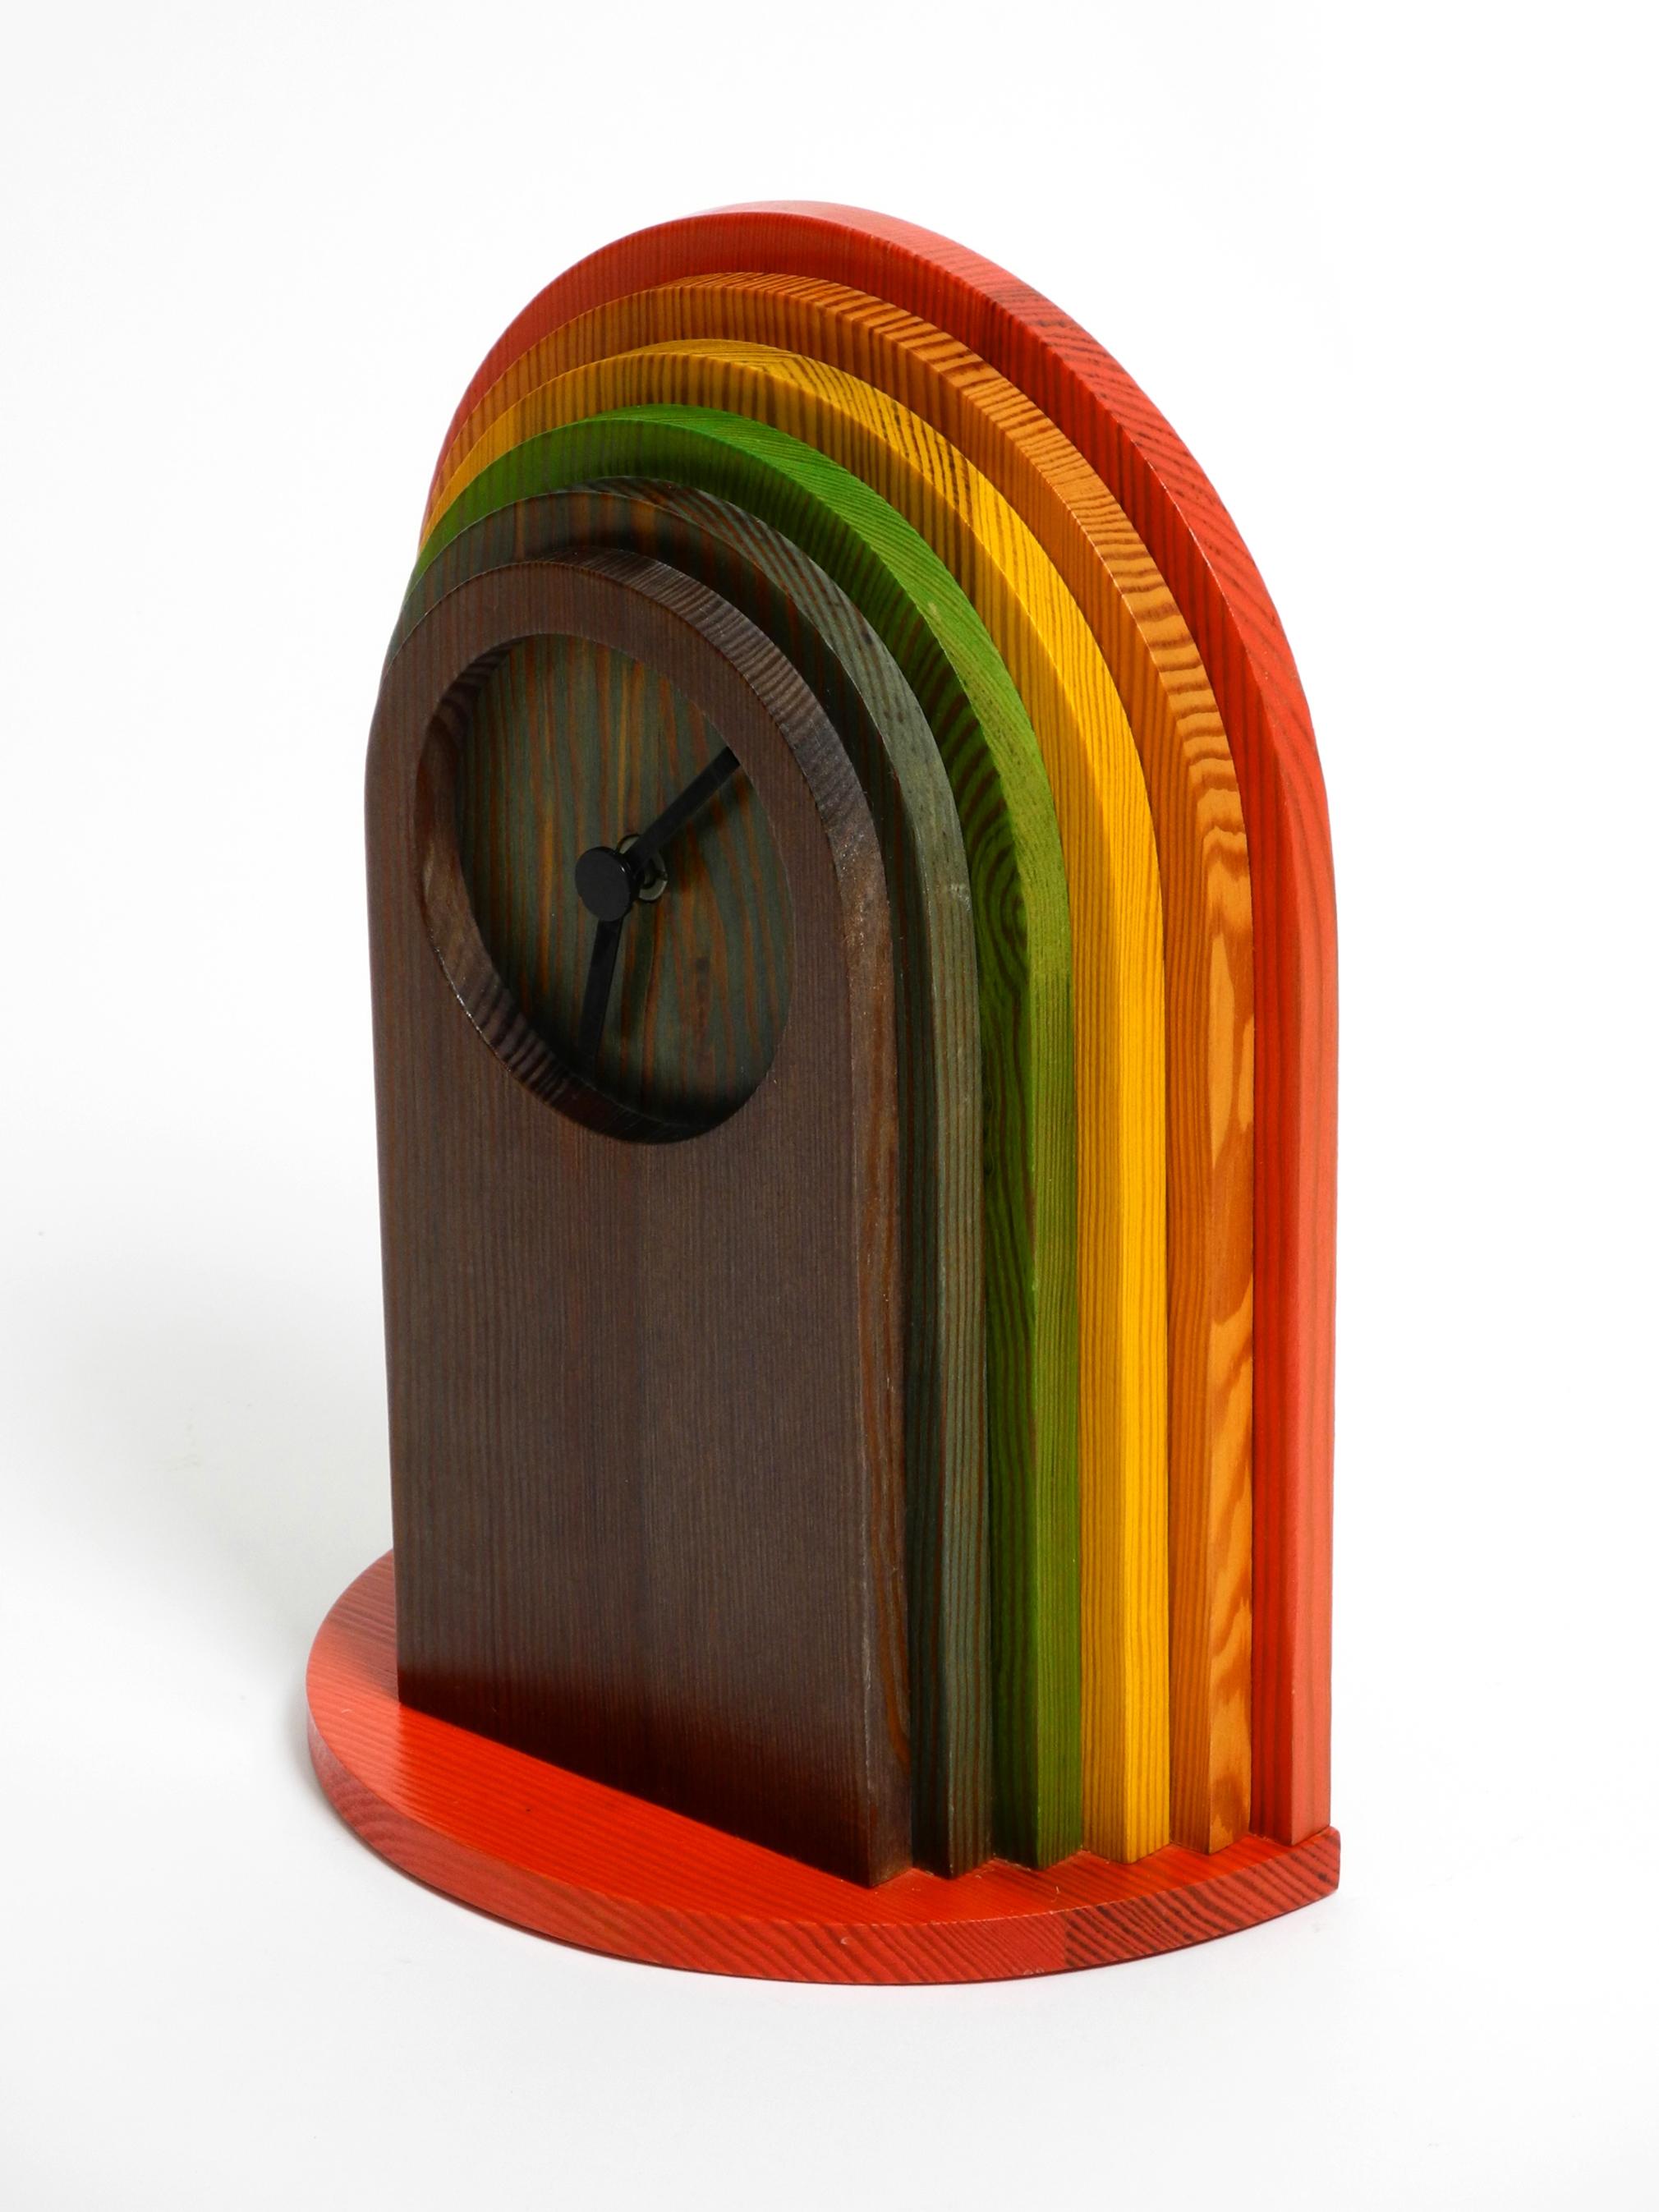 Post-Modern 1980s, Colorful Pine Wood Table Clock in Postmodern Design by Legnomagia Italy